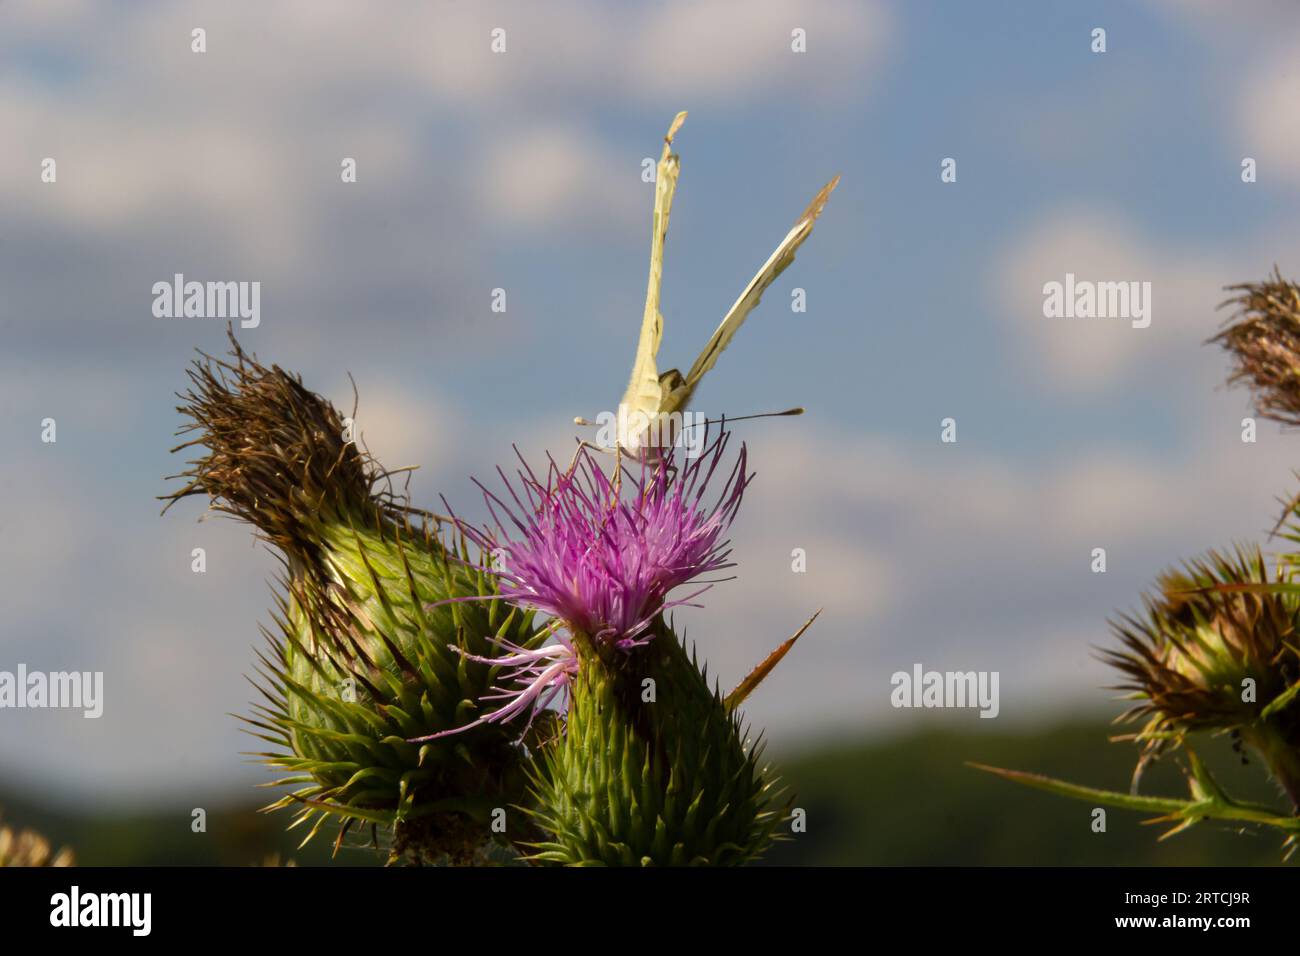 Female European Large Cabbage White butterfly Pieris brassicae feeding on a thistle flower. Stock Photo